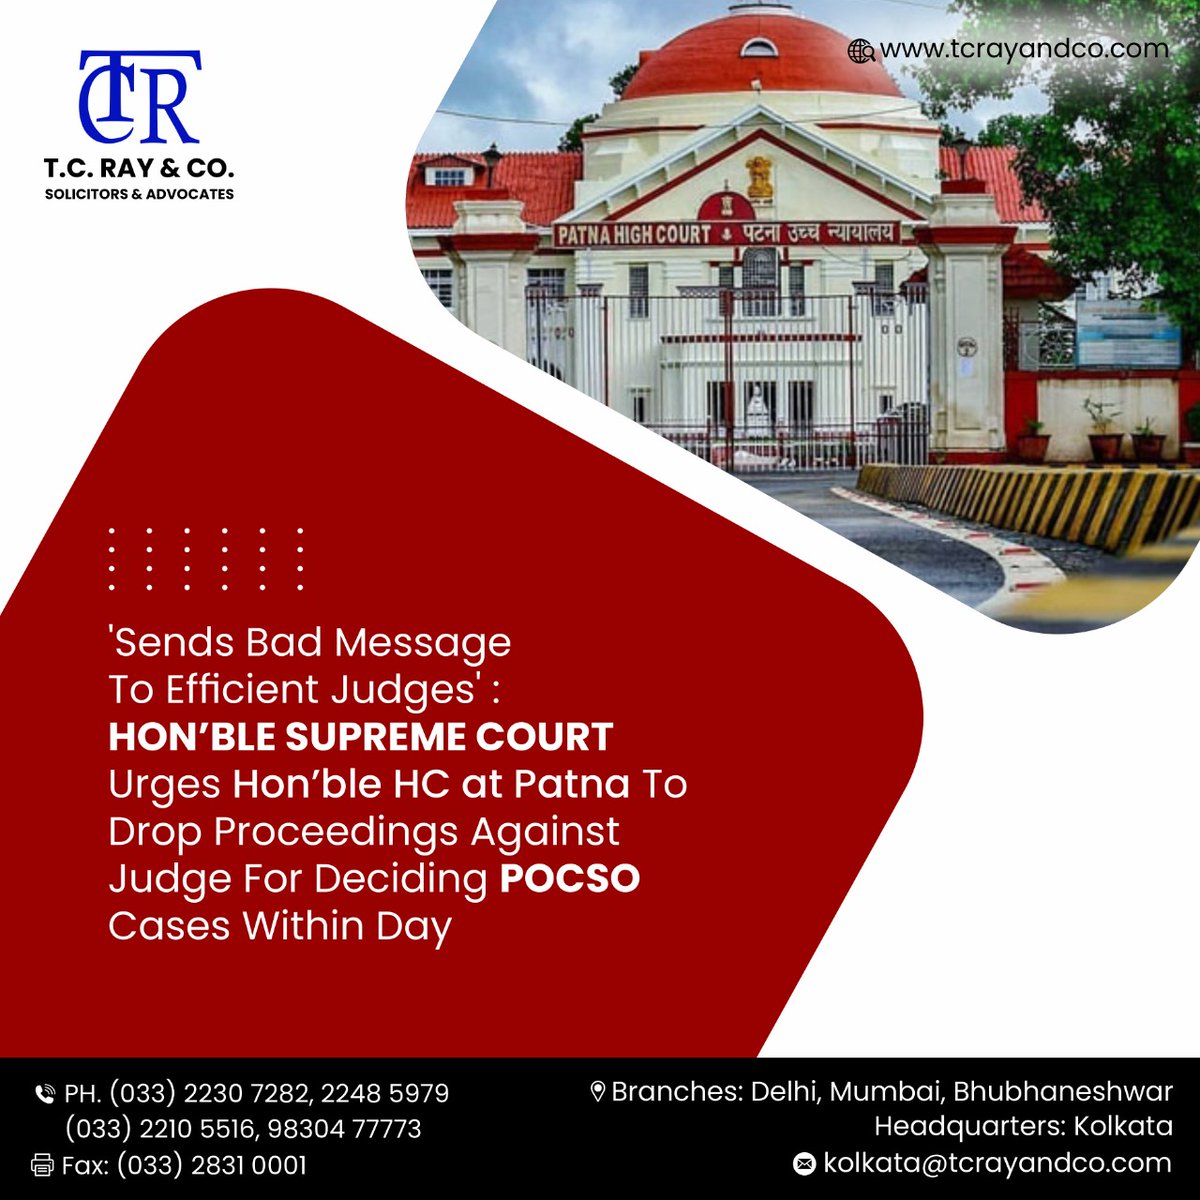 'Sends Bad Message To Efficient Judges': #Hon'ble #Supreme_Court Urges Proceedings Against Judge For Deciding #POCSO Cases Within Day.

#Supremecourt #Honble_HC_at_Madras #Women #High_Court #Cost #Doctrine #DISPOSAL #persons #Citizens #Directs #Complainant #Govt_services 